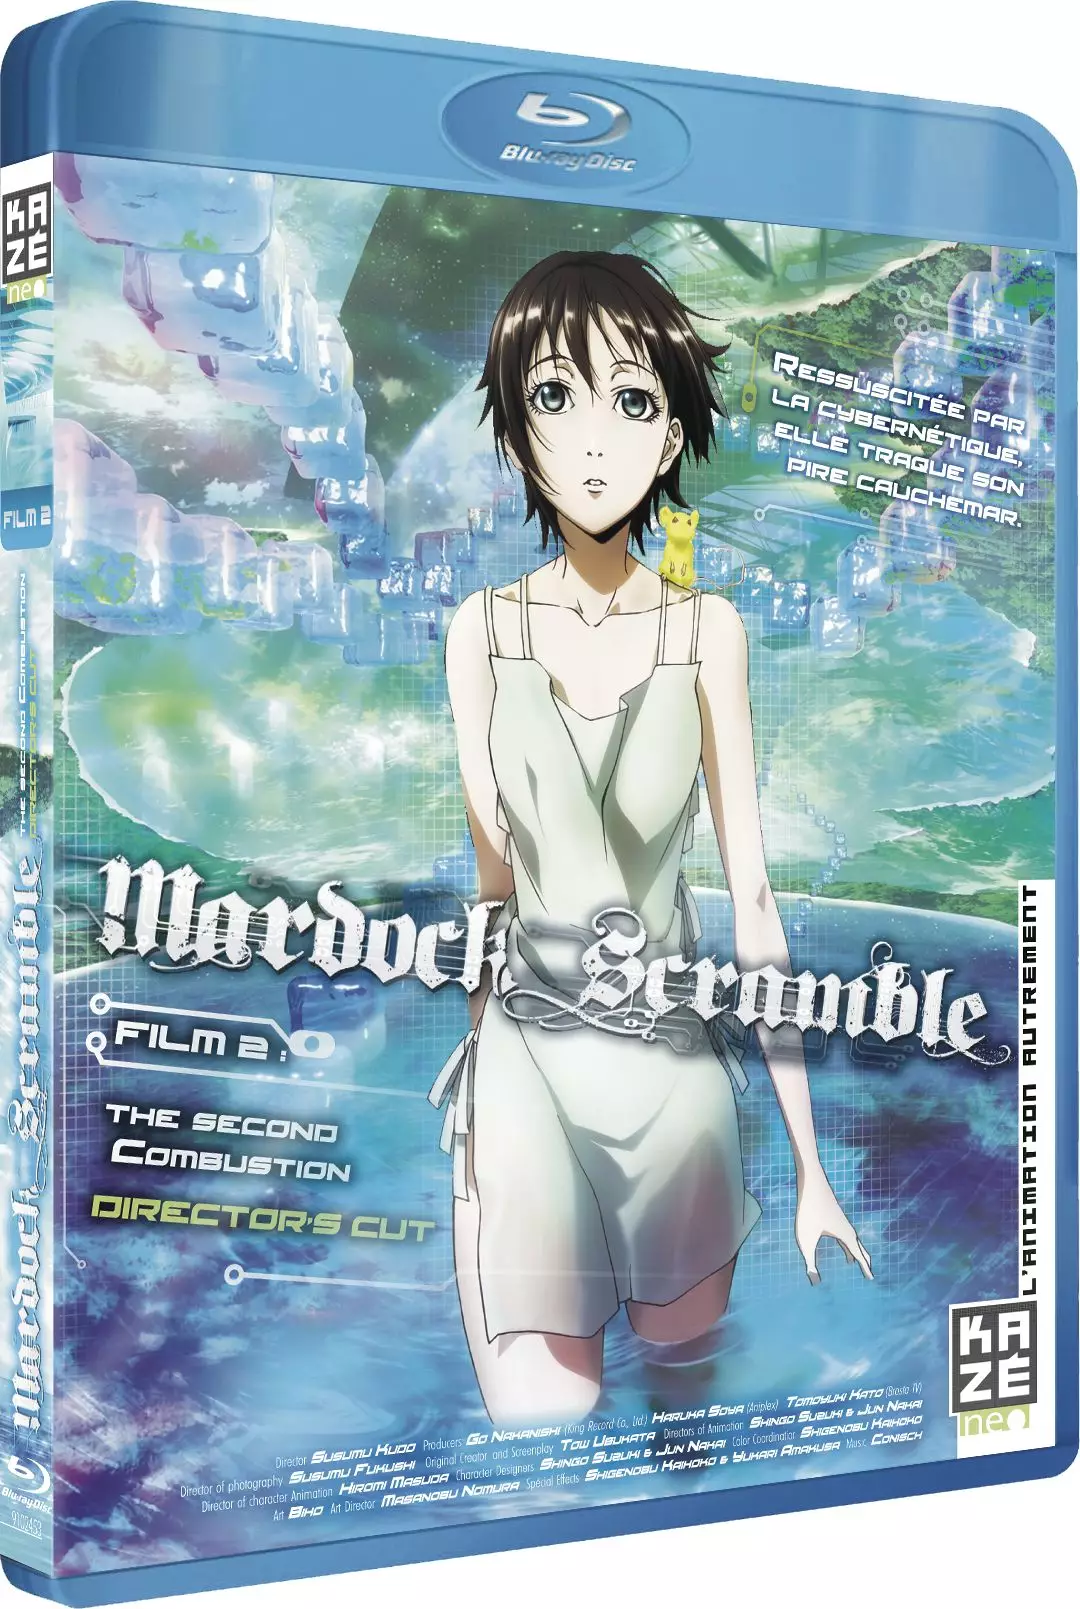 Mardock Scramble: The Second Combustion - Blu-Ray